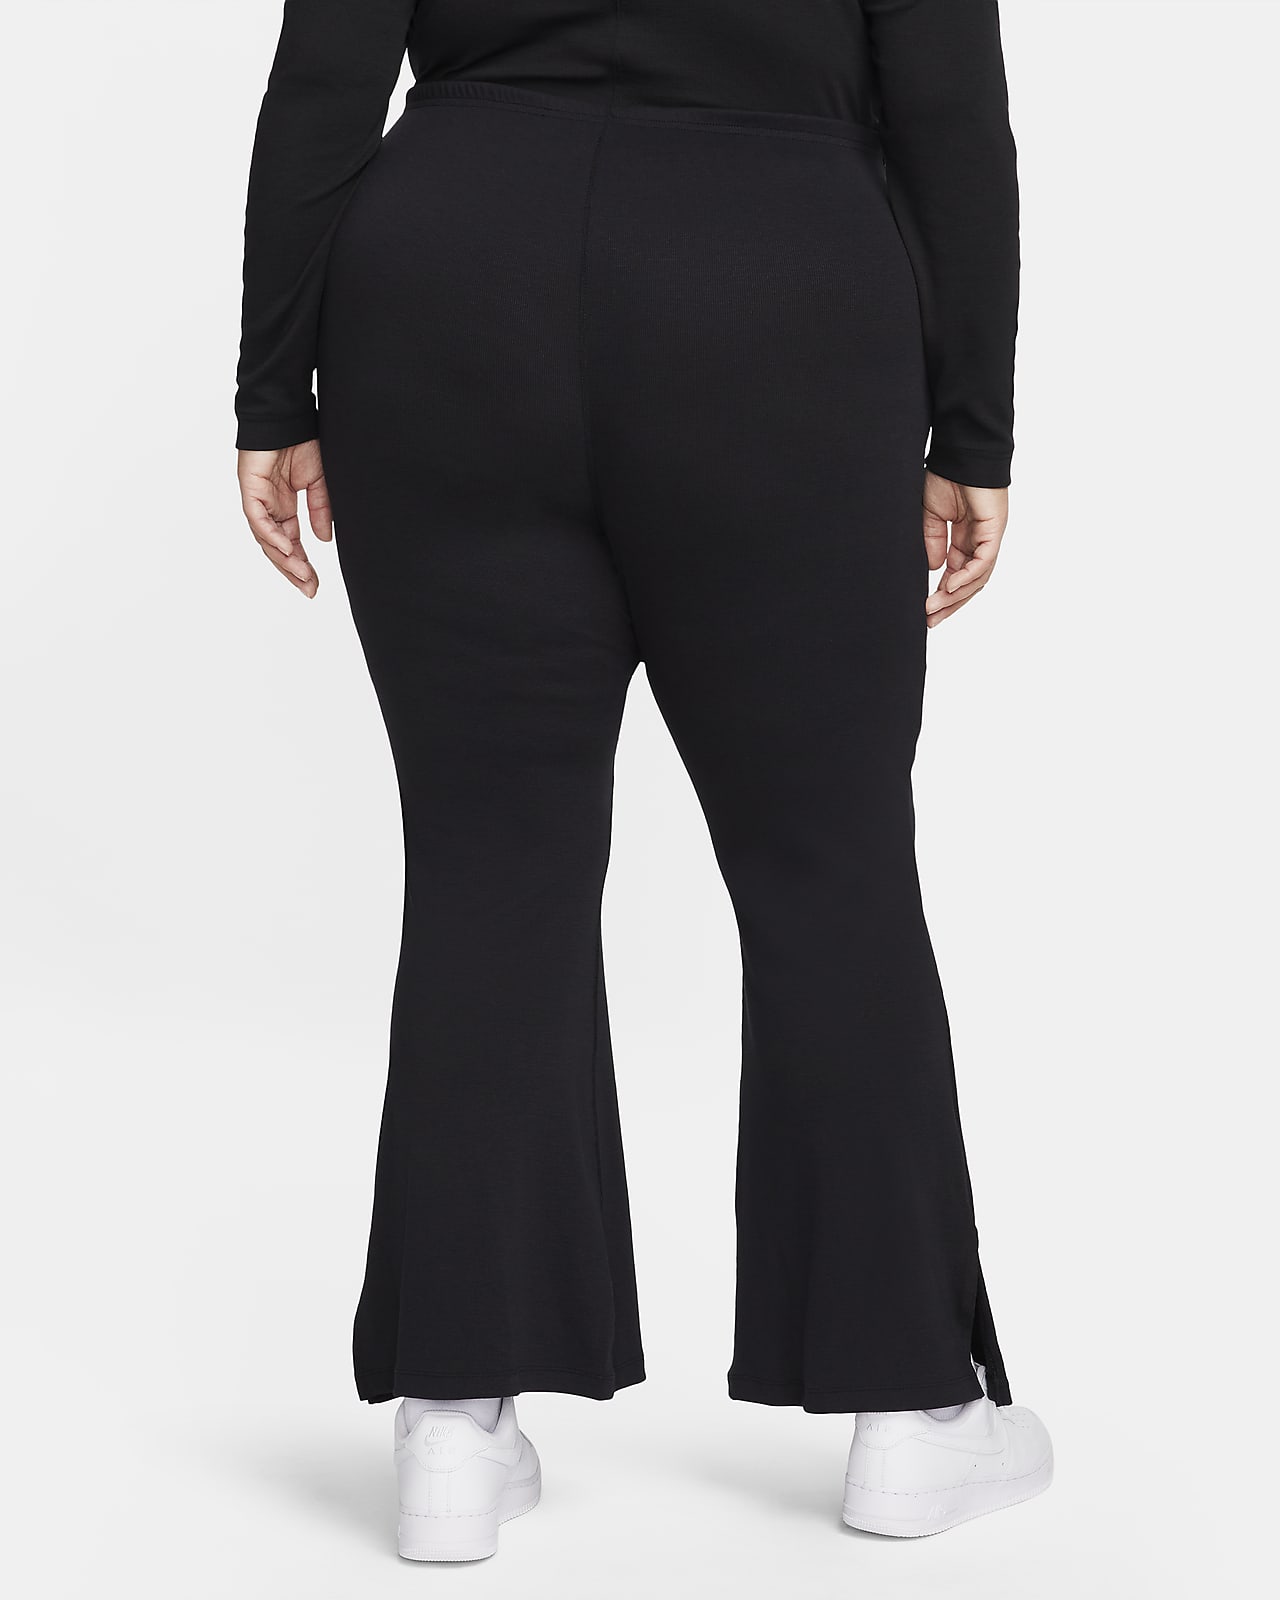 Forever 21 Classic Knit Leggings  Fashion, Forever 21 activewear